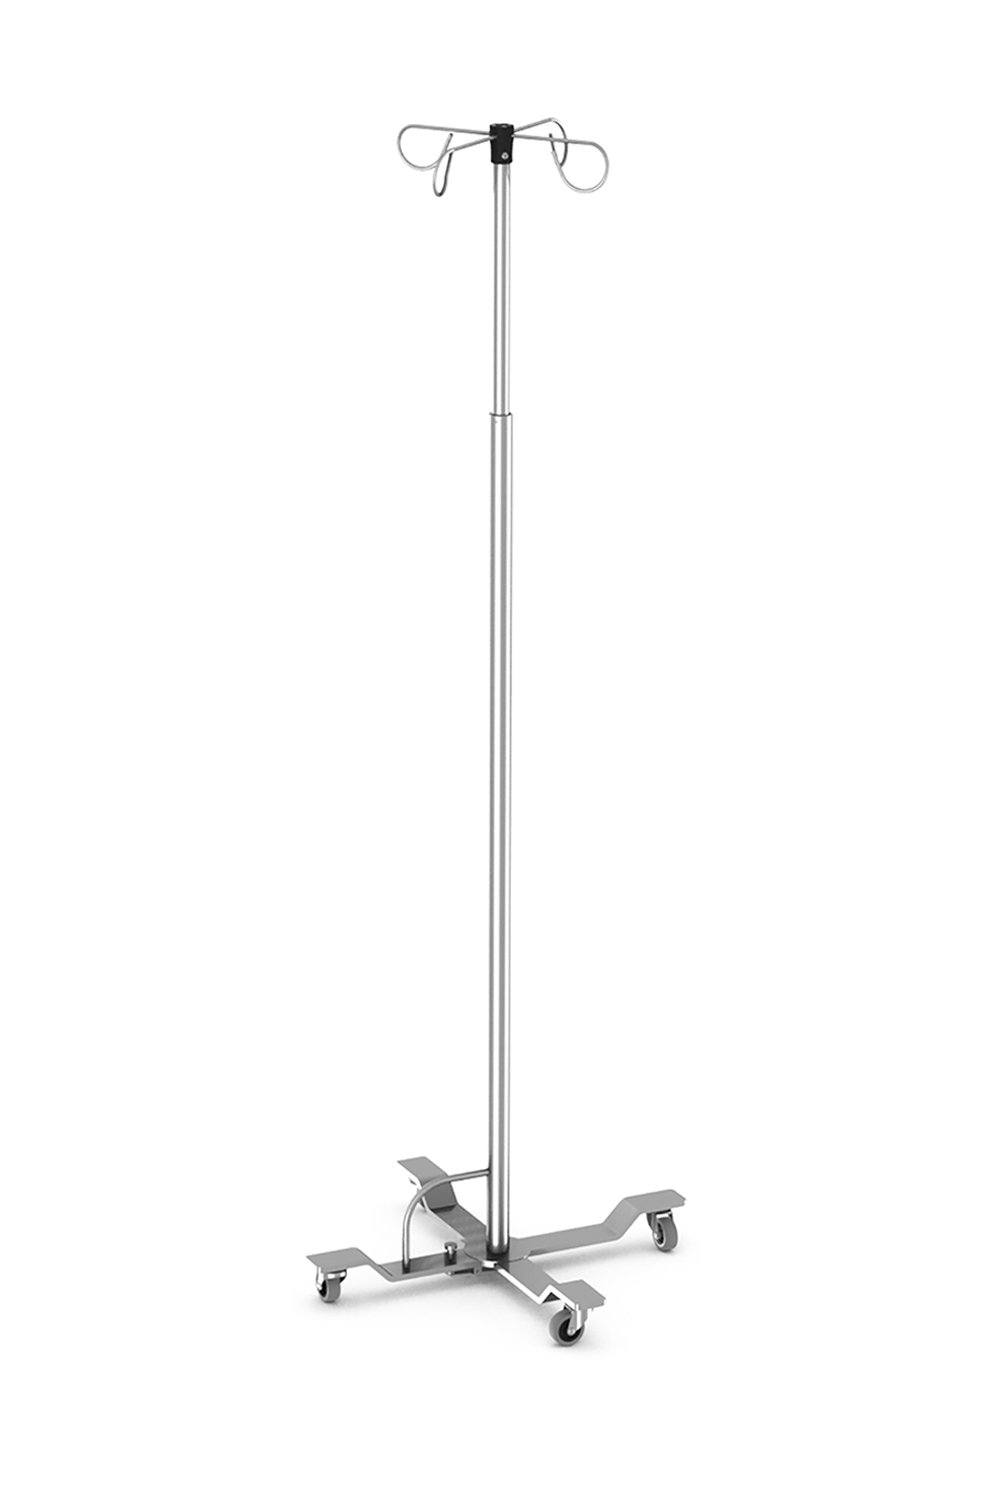 IV Stand Stainless Solutions Macmedical Foot Operated Stainless Steel, welded base 4-legs, 4-hooks